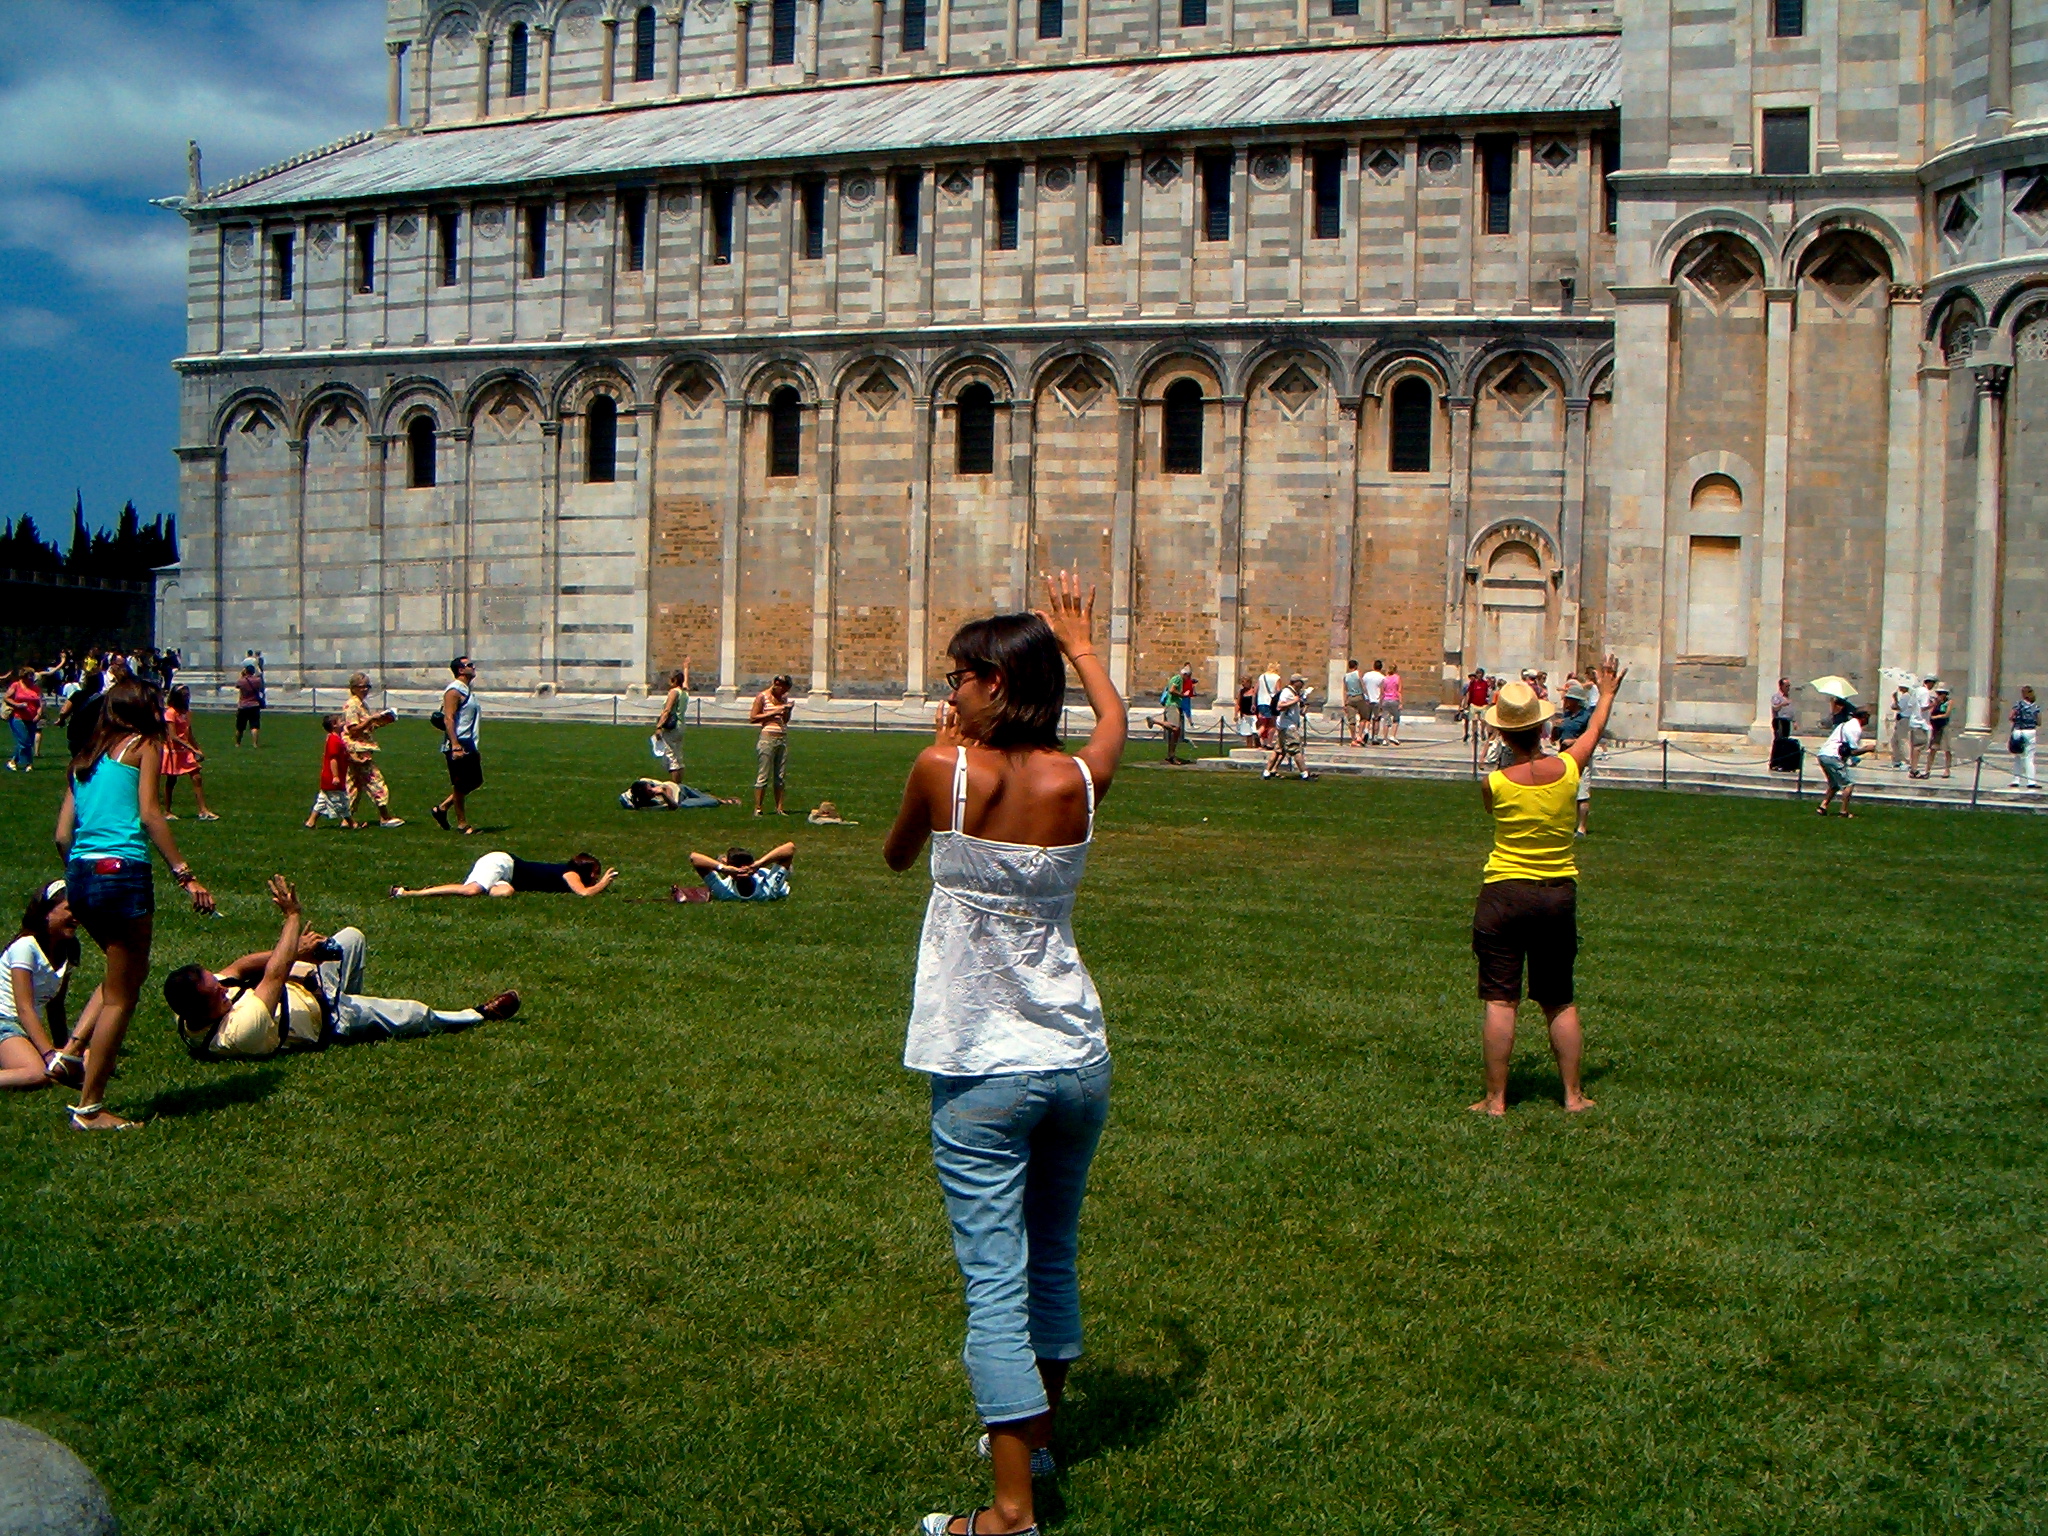 Clich%C3%A9d_Photos_Reversed_-_Holding_up_the_Leanig_Tower_of_Pisa.jpg